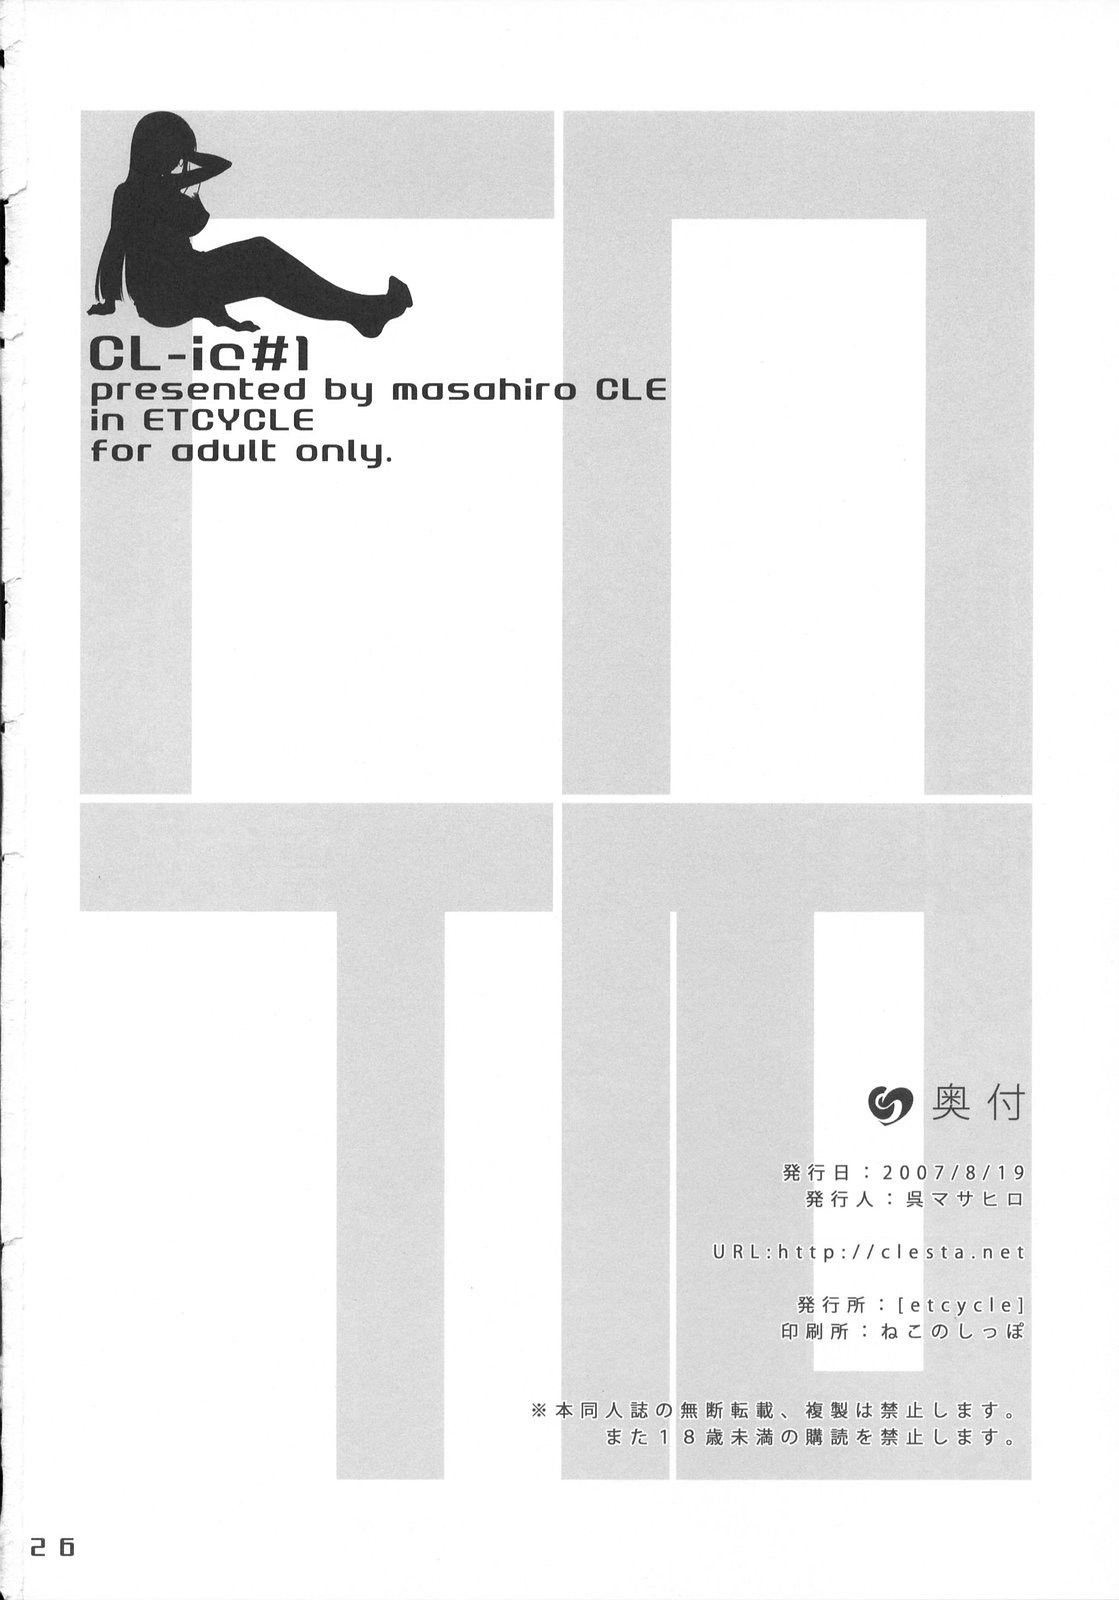 (C72)(Doujinshi)[Etcycle] CL-ic#1 (Kimiaru)(chinese) (C72)(同人誌)[etcycle] CL-ic#1(君ある)(微笑&amp;miku萌汉化)